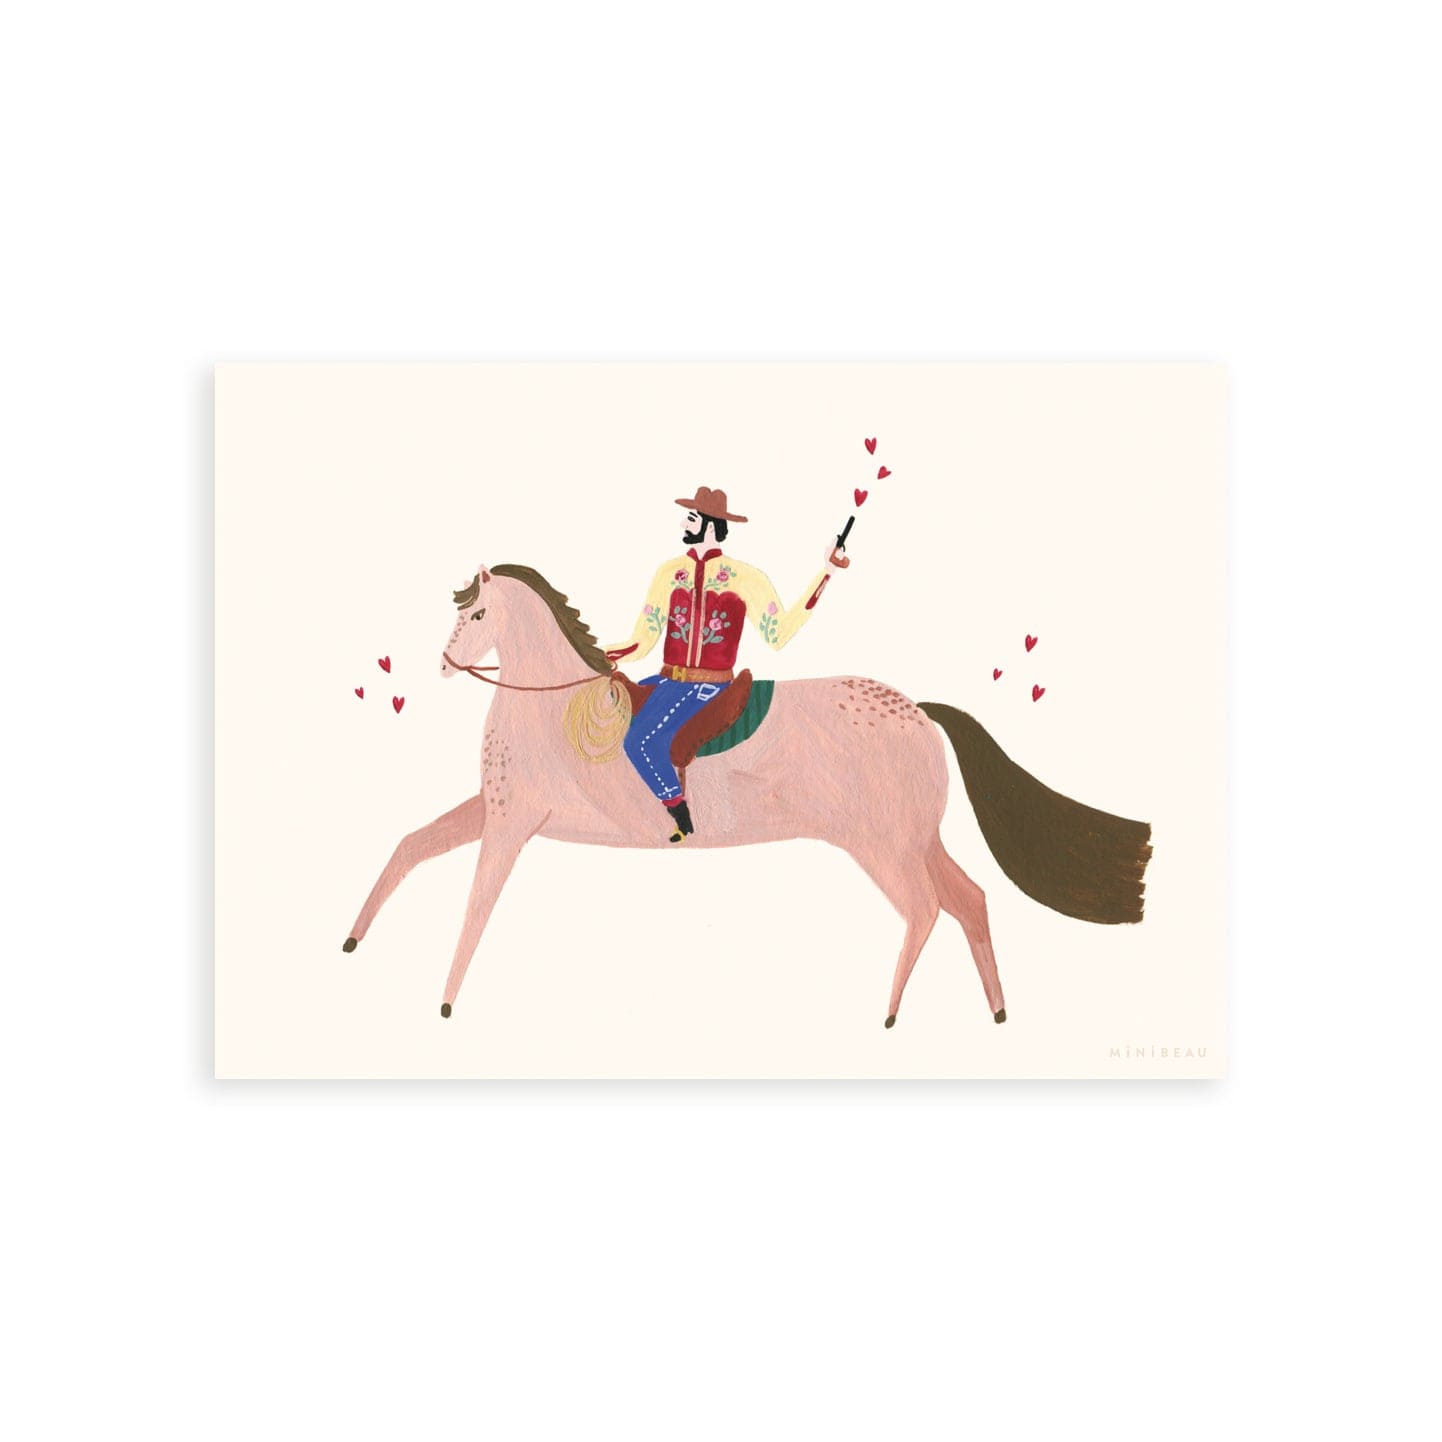 Our cowboy Art print features a cowboy, dressed in a floral shirt, on a brown horse, shooting red hearts from a pistol on a neutral background.